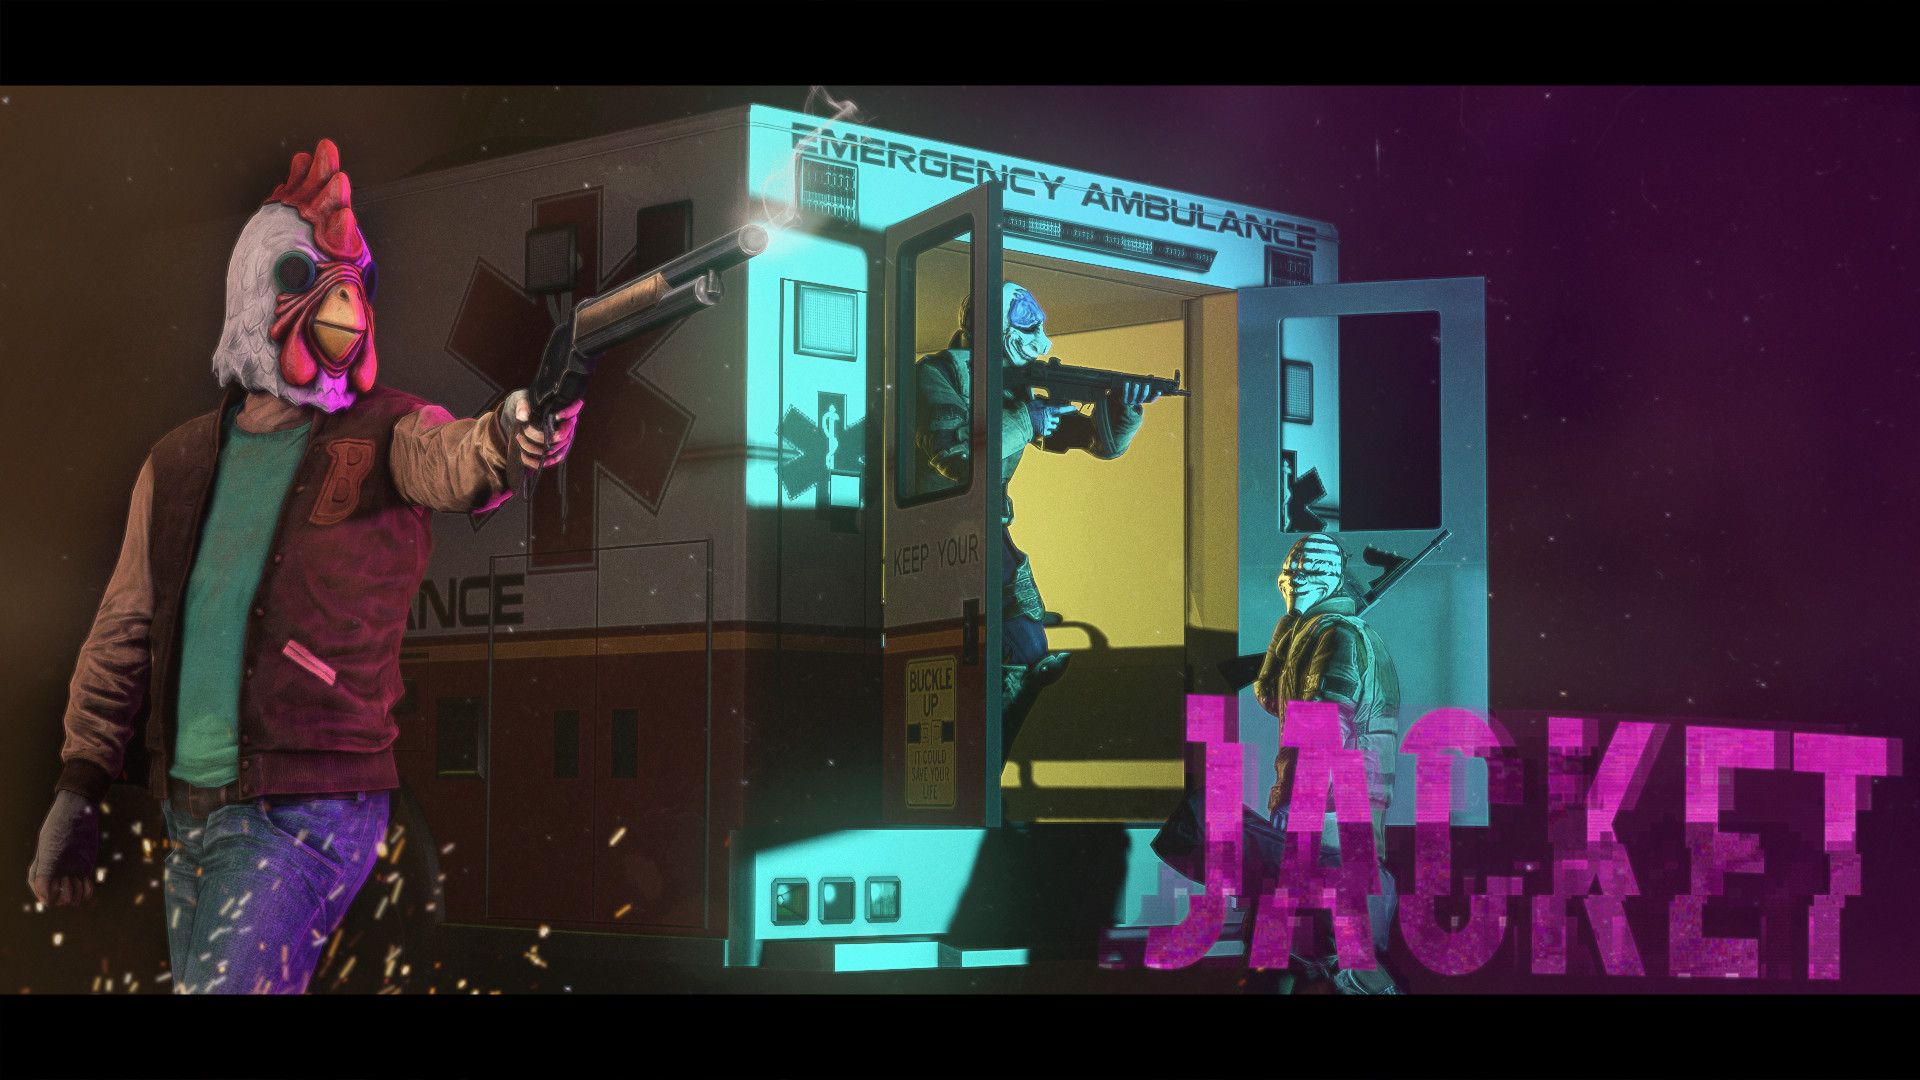 1920x1080 I love Hotline Miami and PAYDAY so much, I made this. Hope you guys like it!